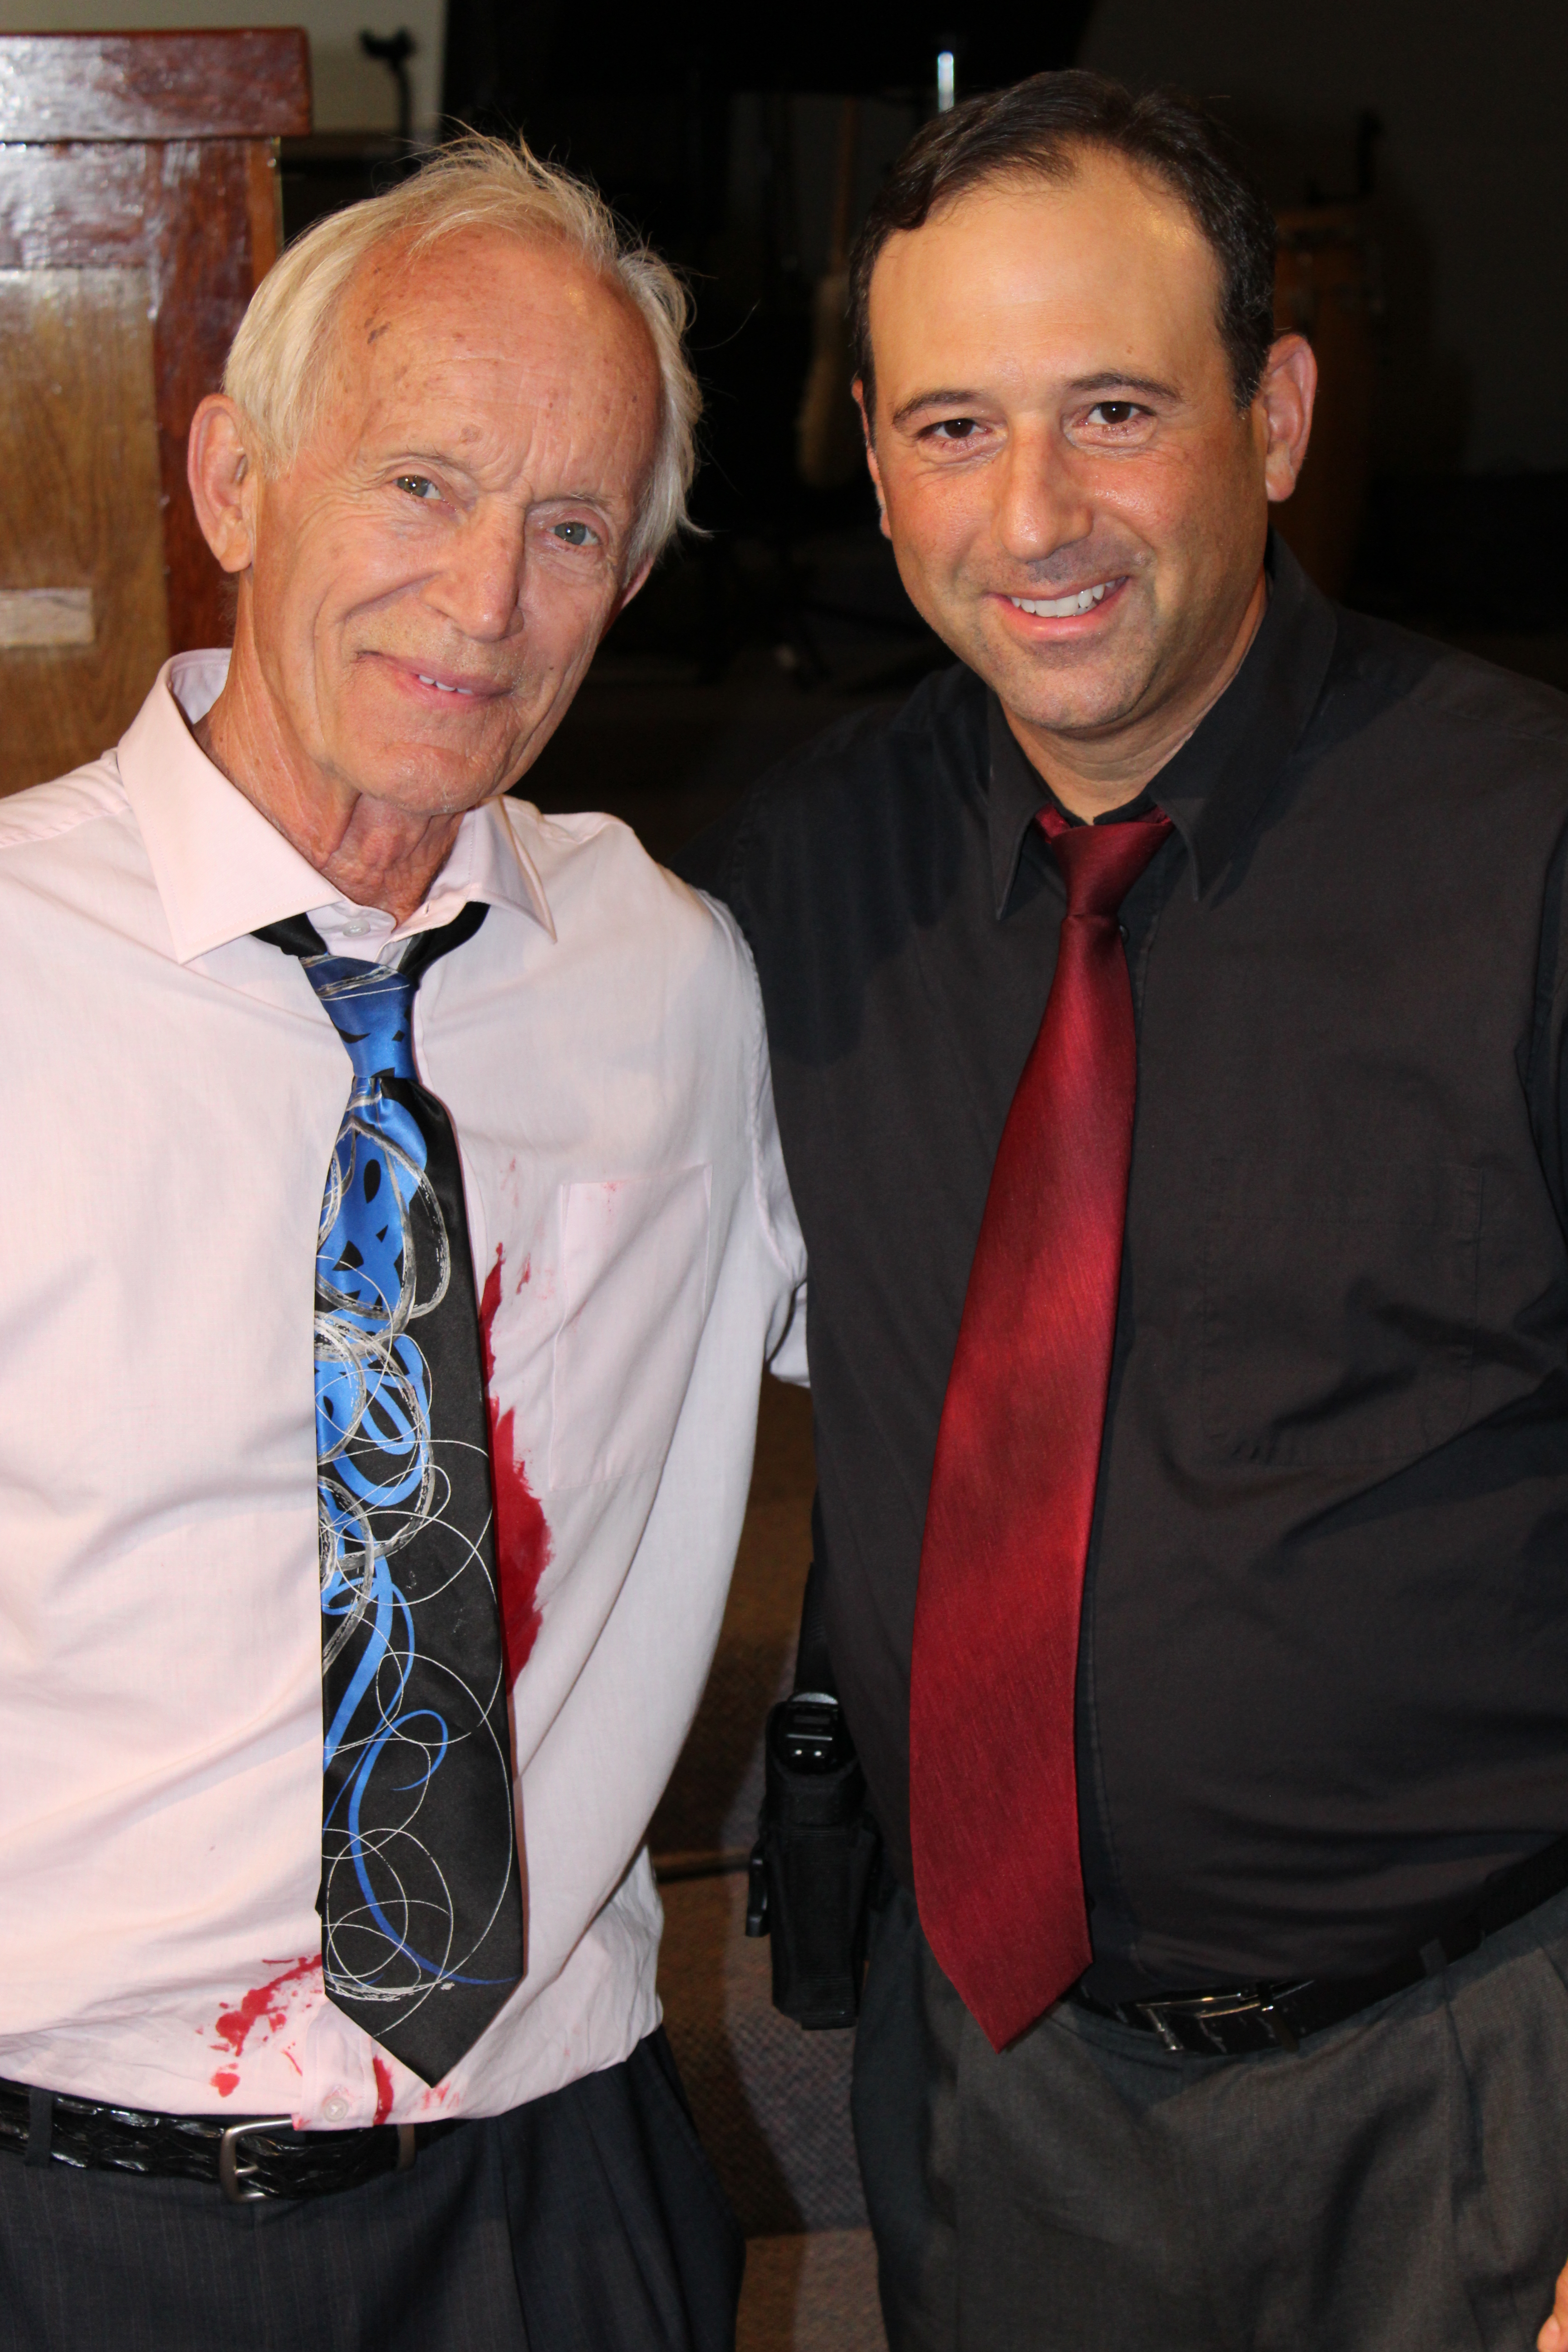 Rob Sciglimpaglia and Lance Henriksen from set of motion picture 